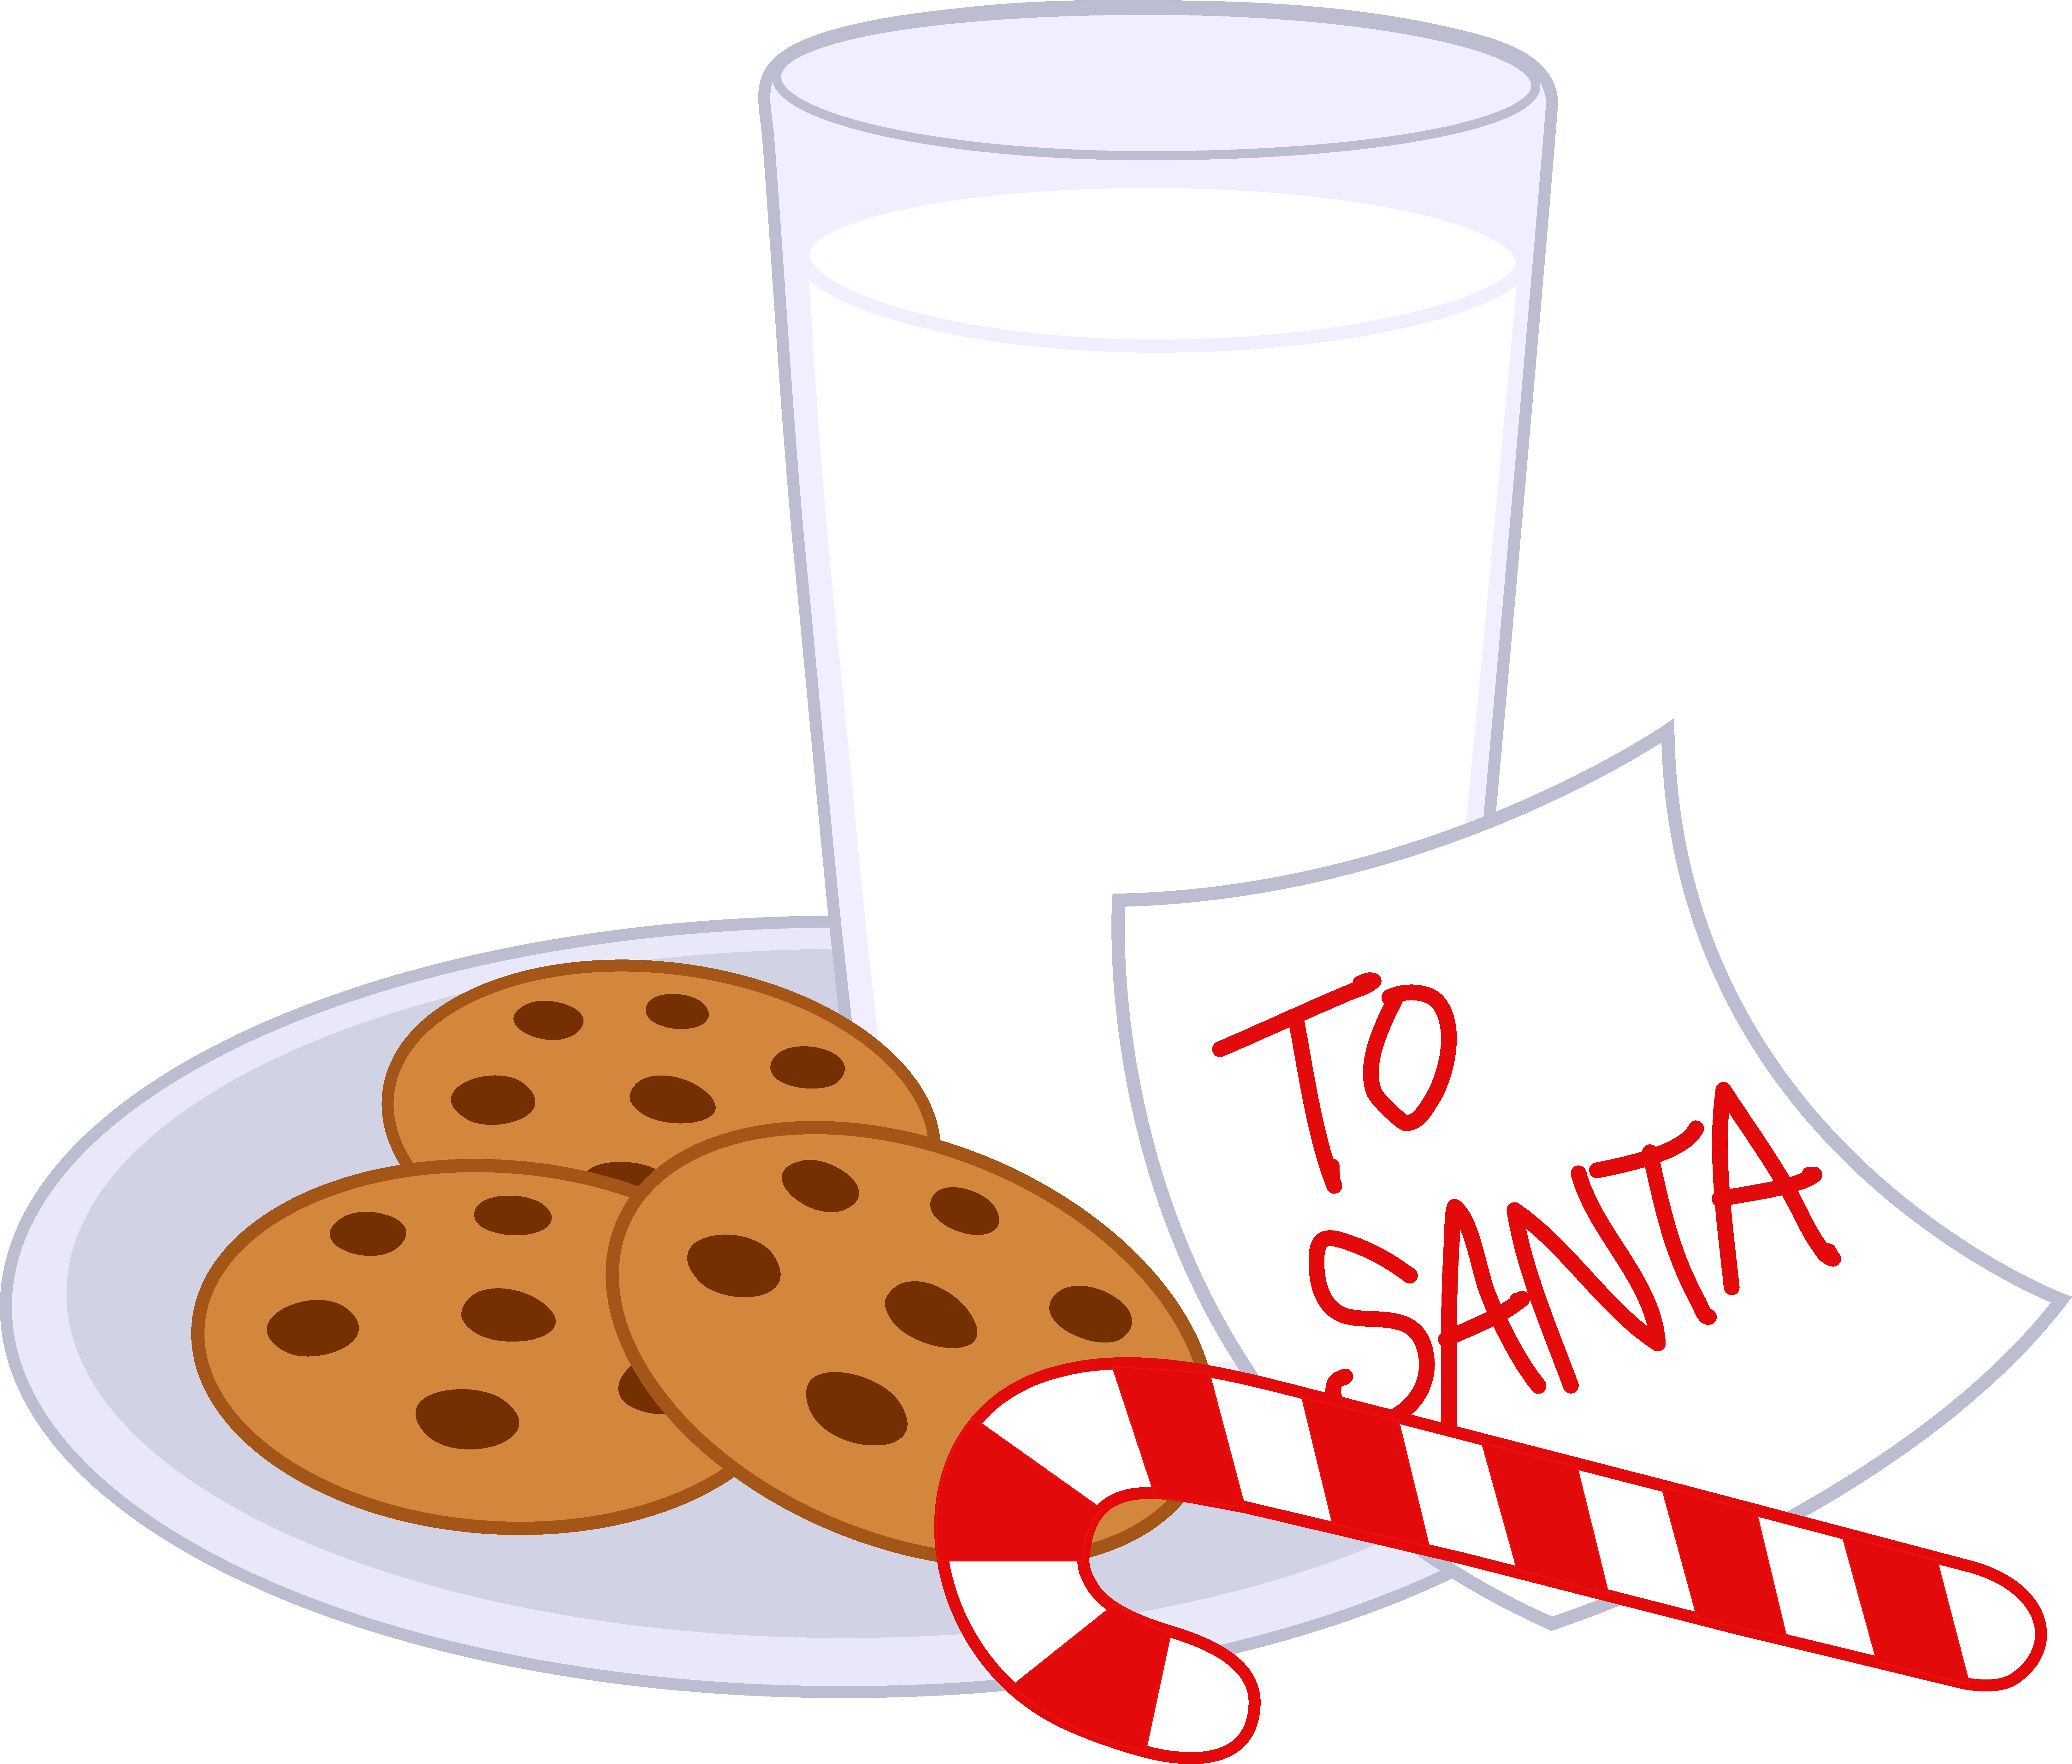 Cookies and milk for. Holidays clipart holiday meal